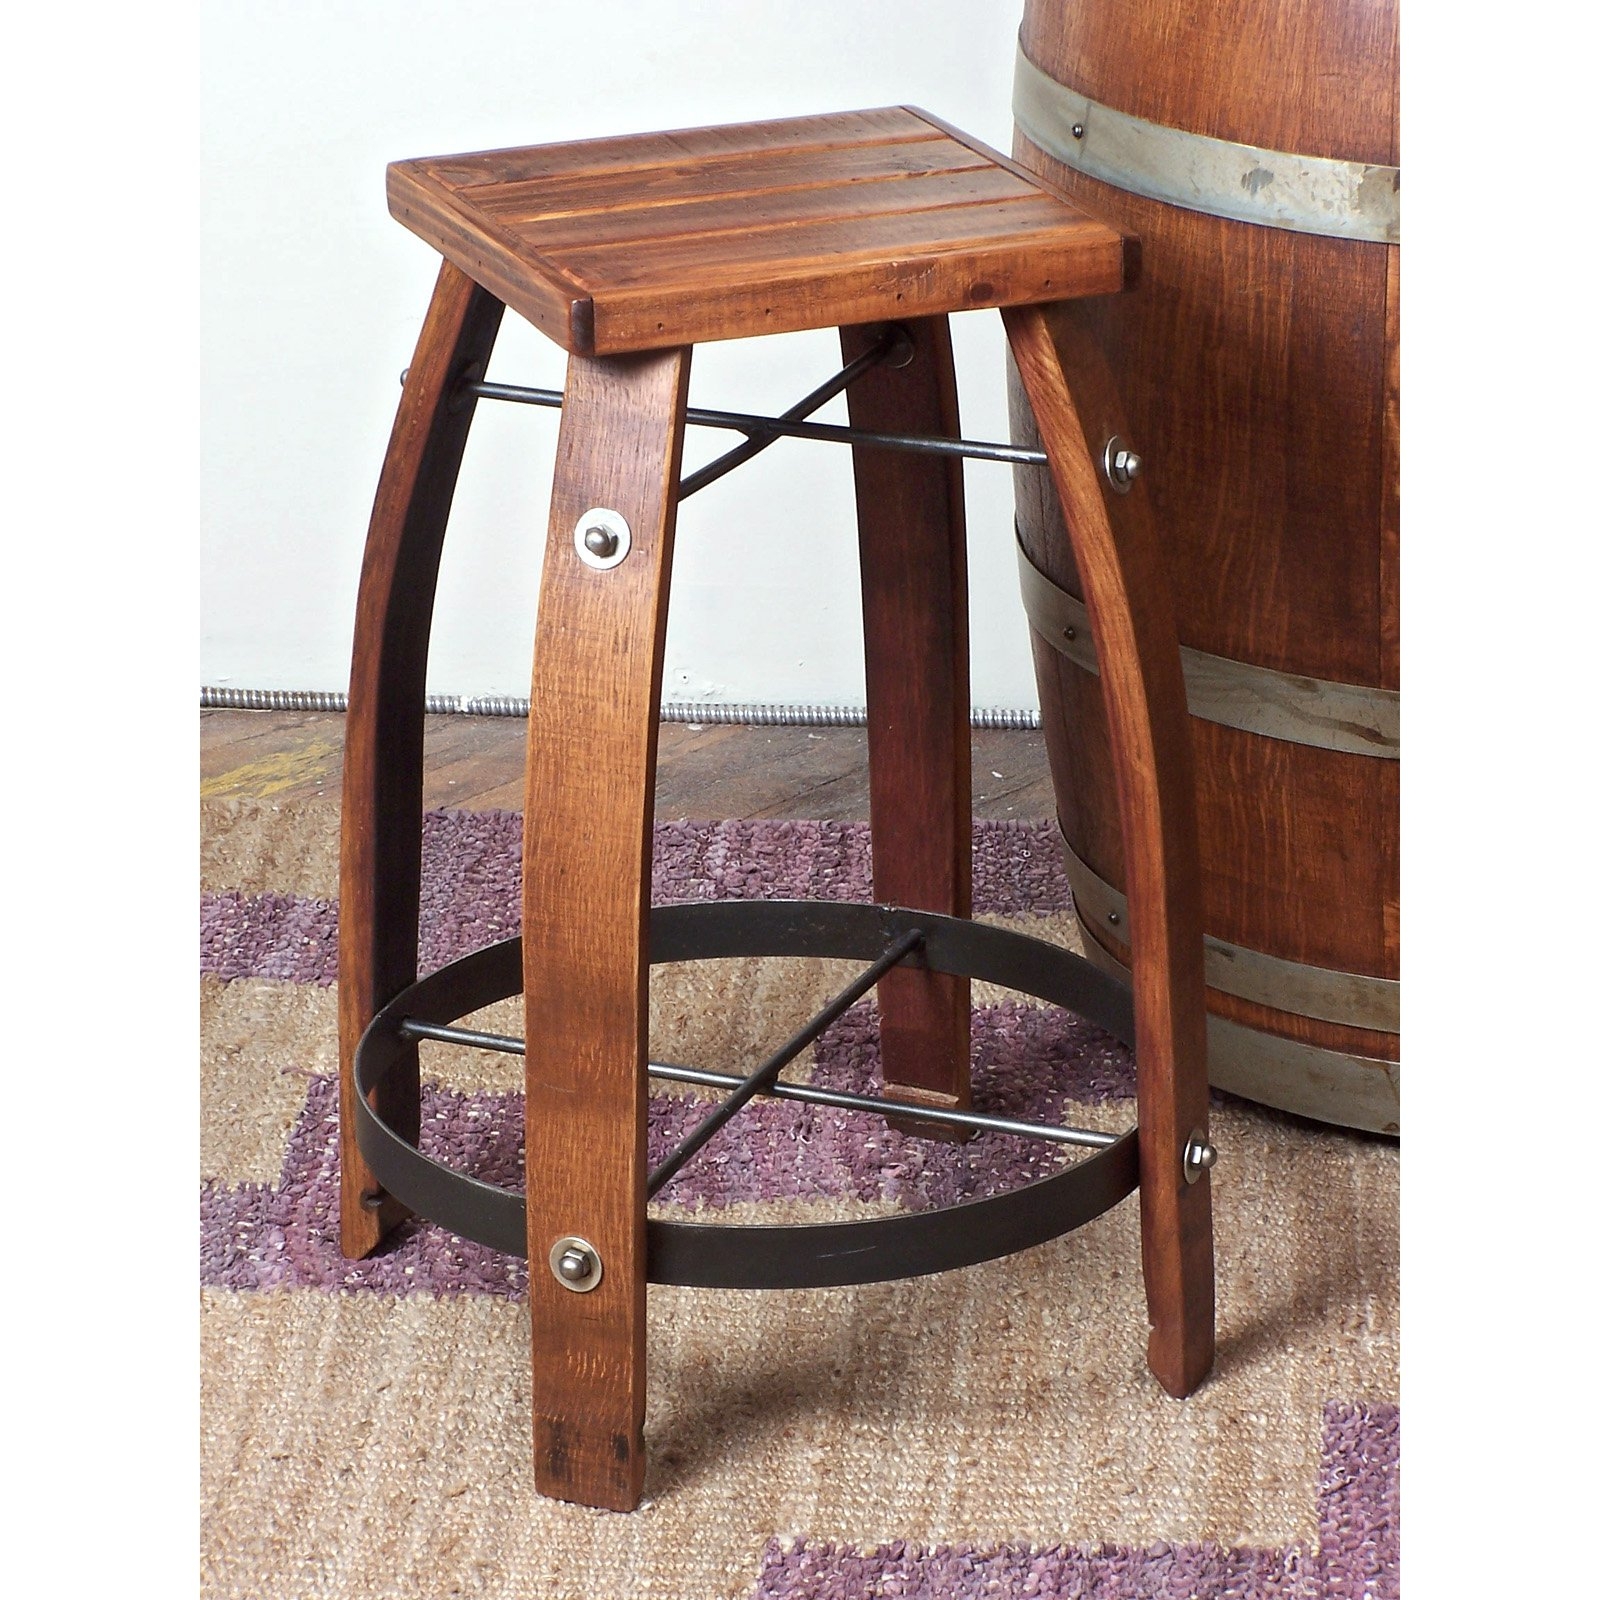 28" Stave Stool w/ Wood Seat - Made from Wine Barrels (Pine Finish)